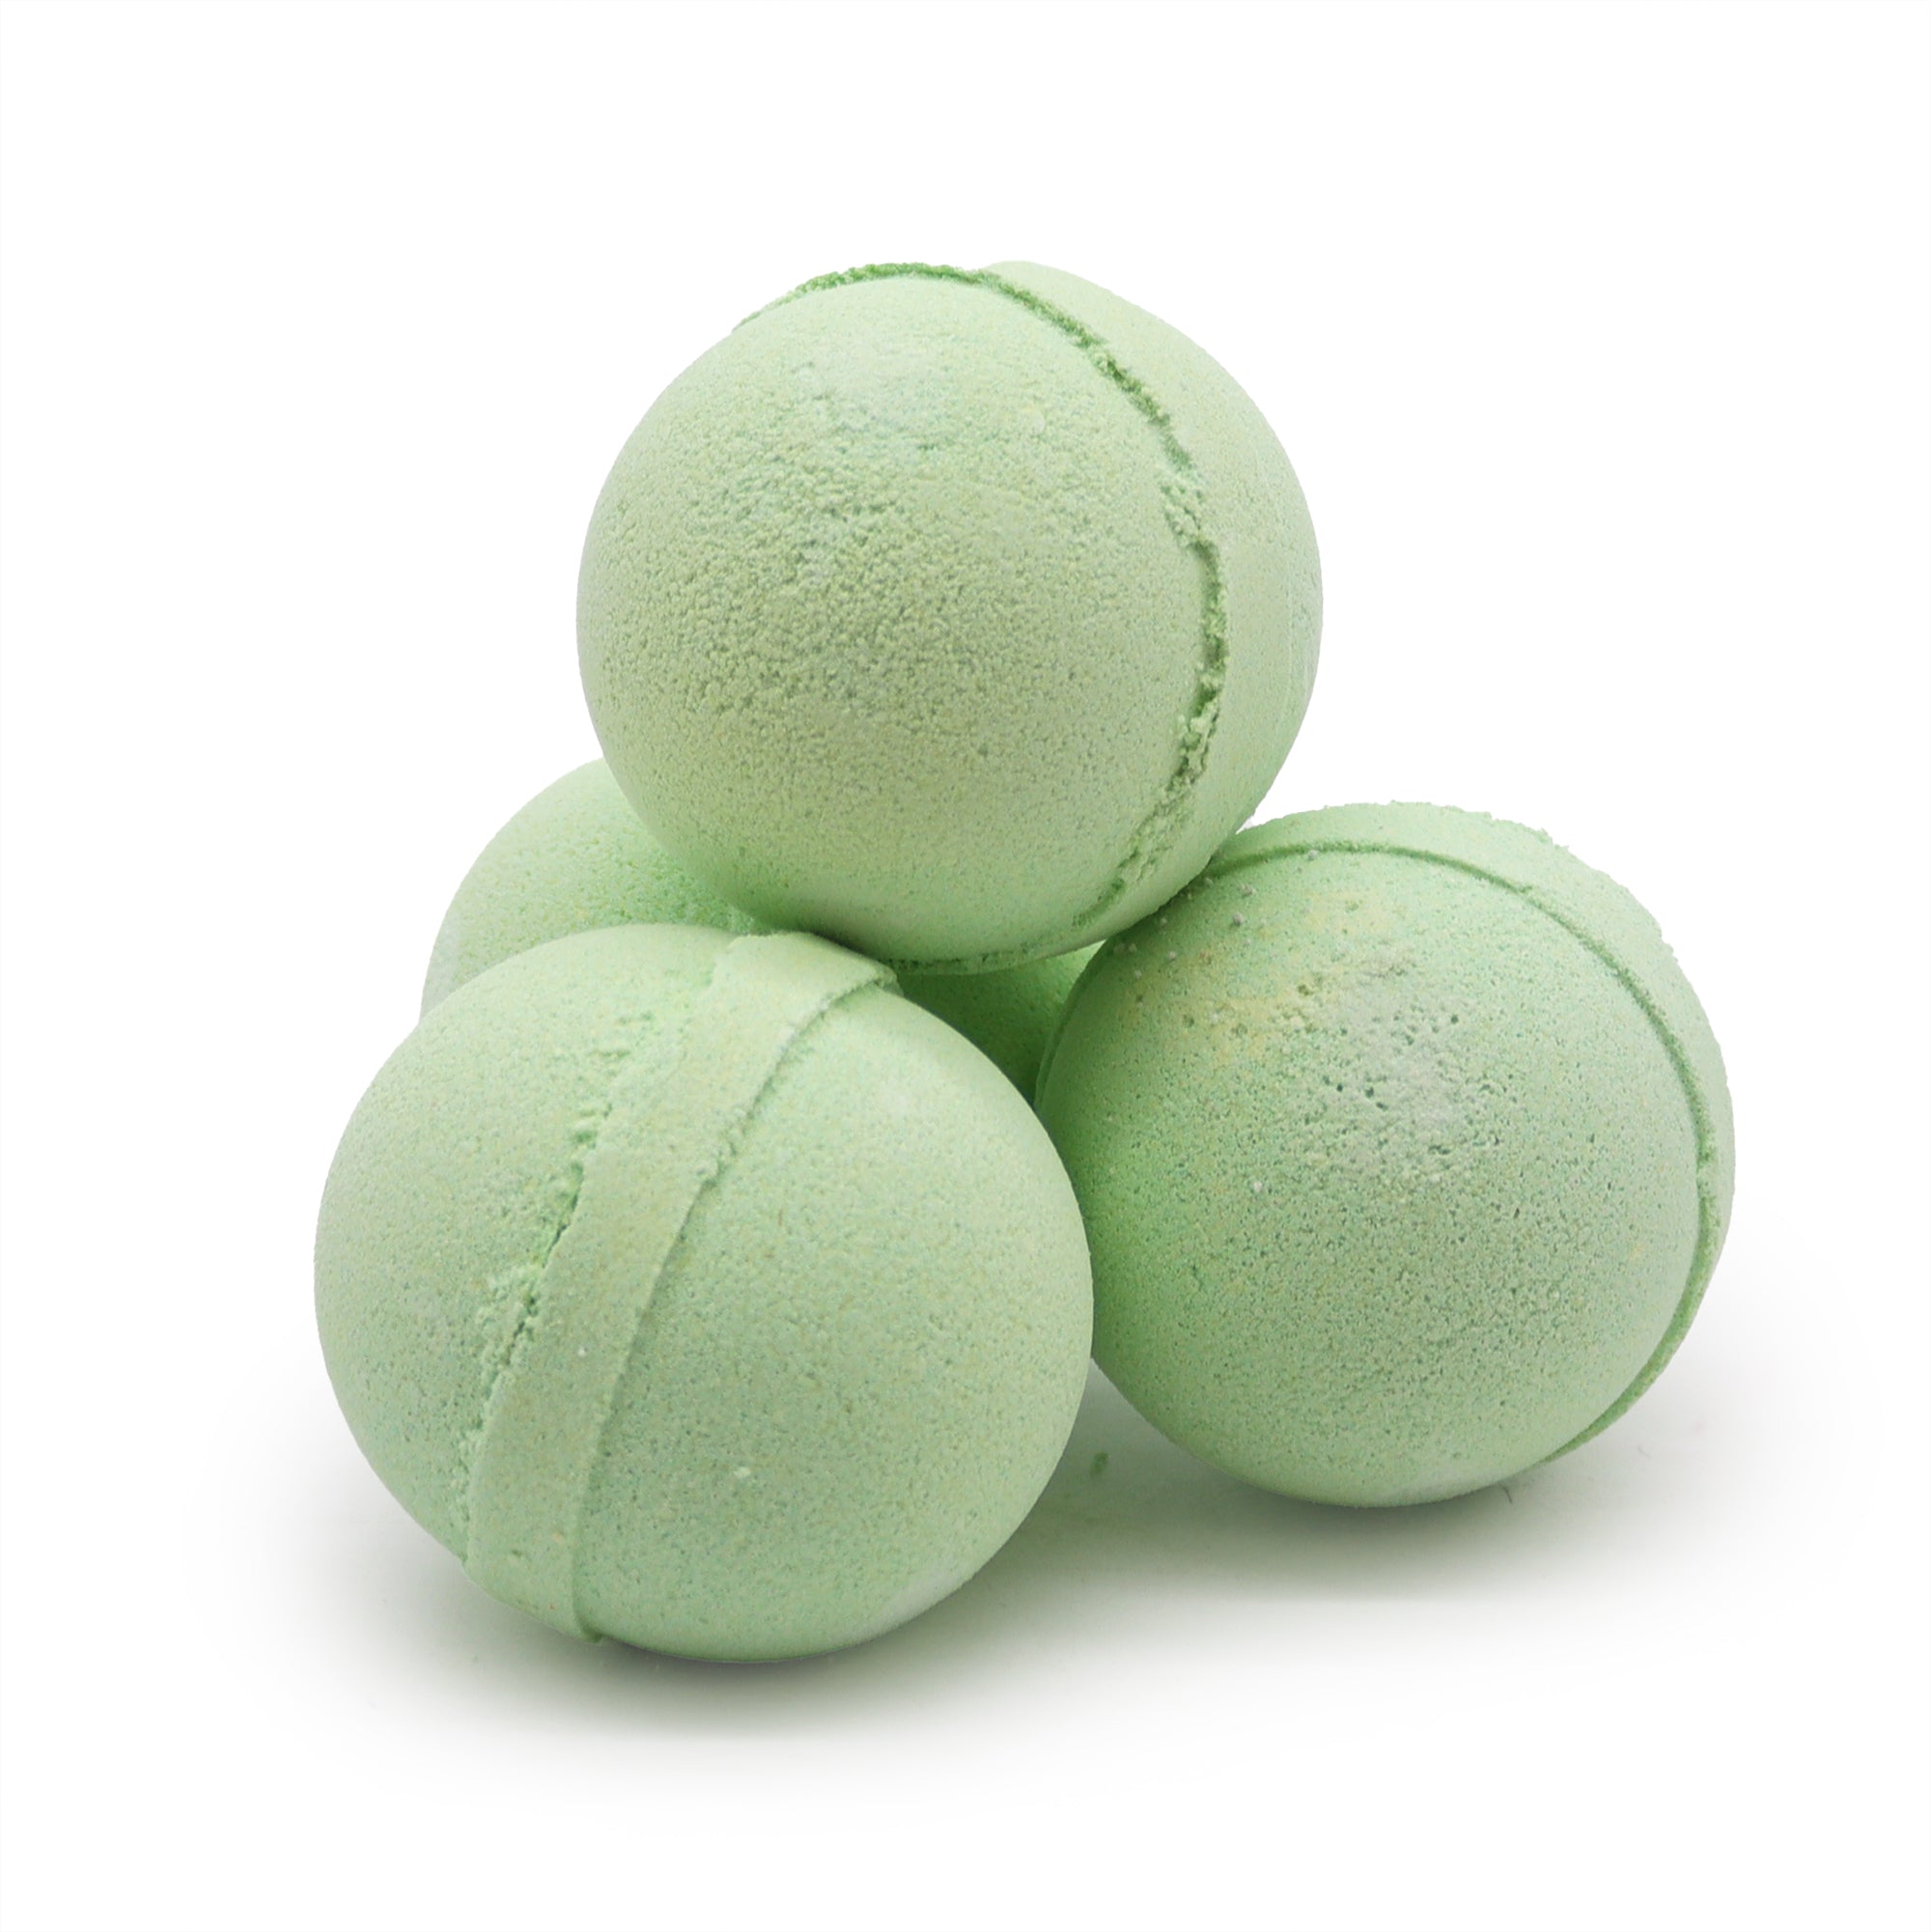 View Rosemary Thyme Bath Bomb information